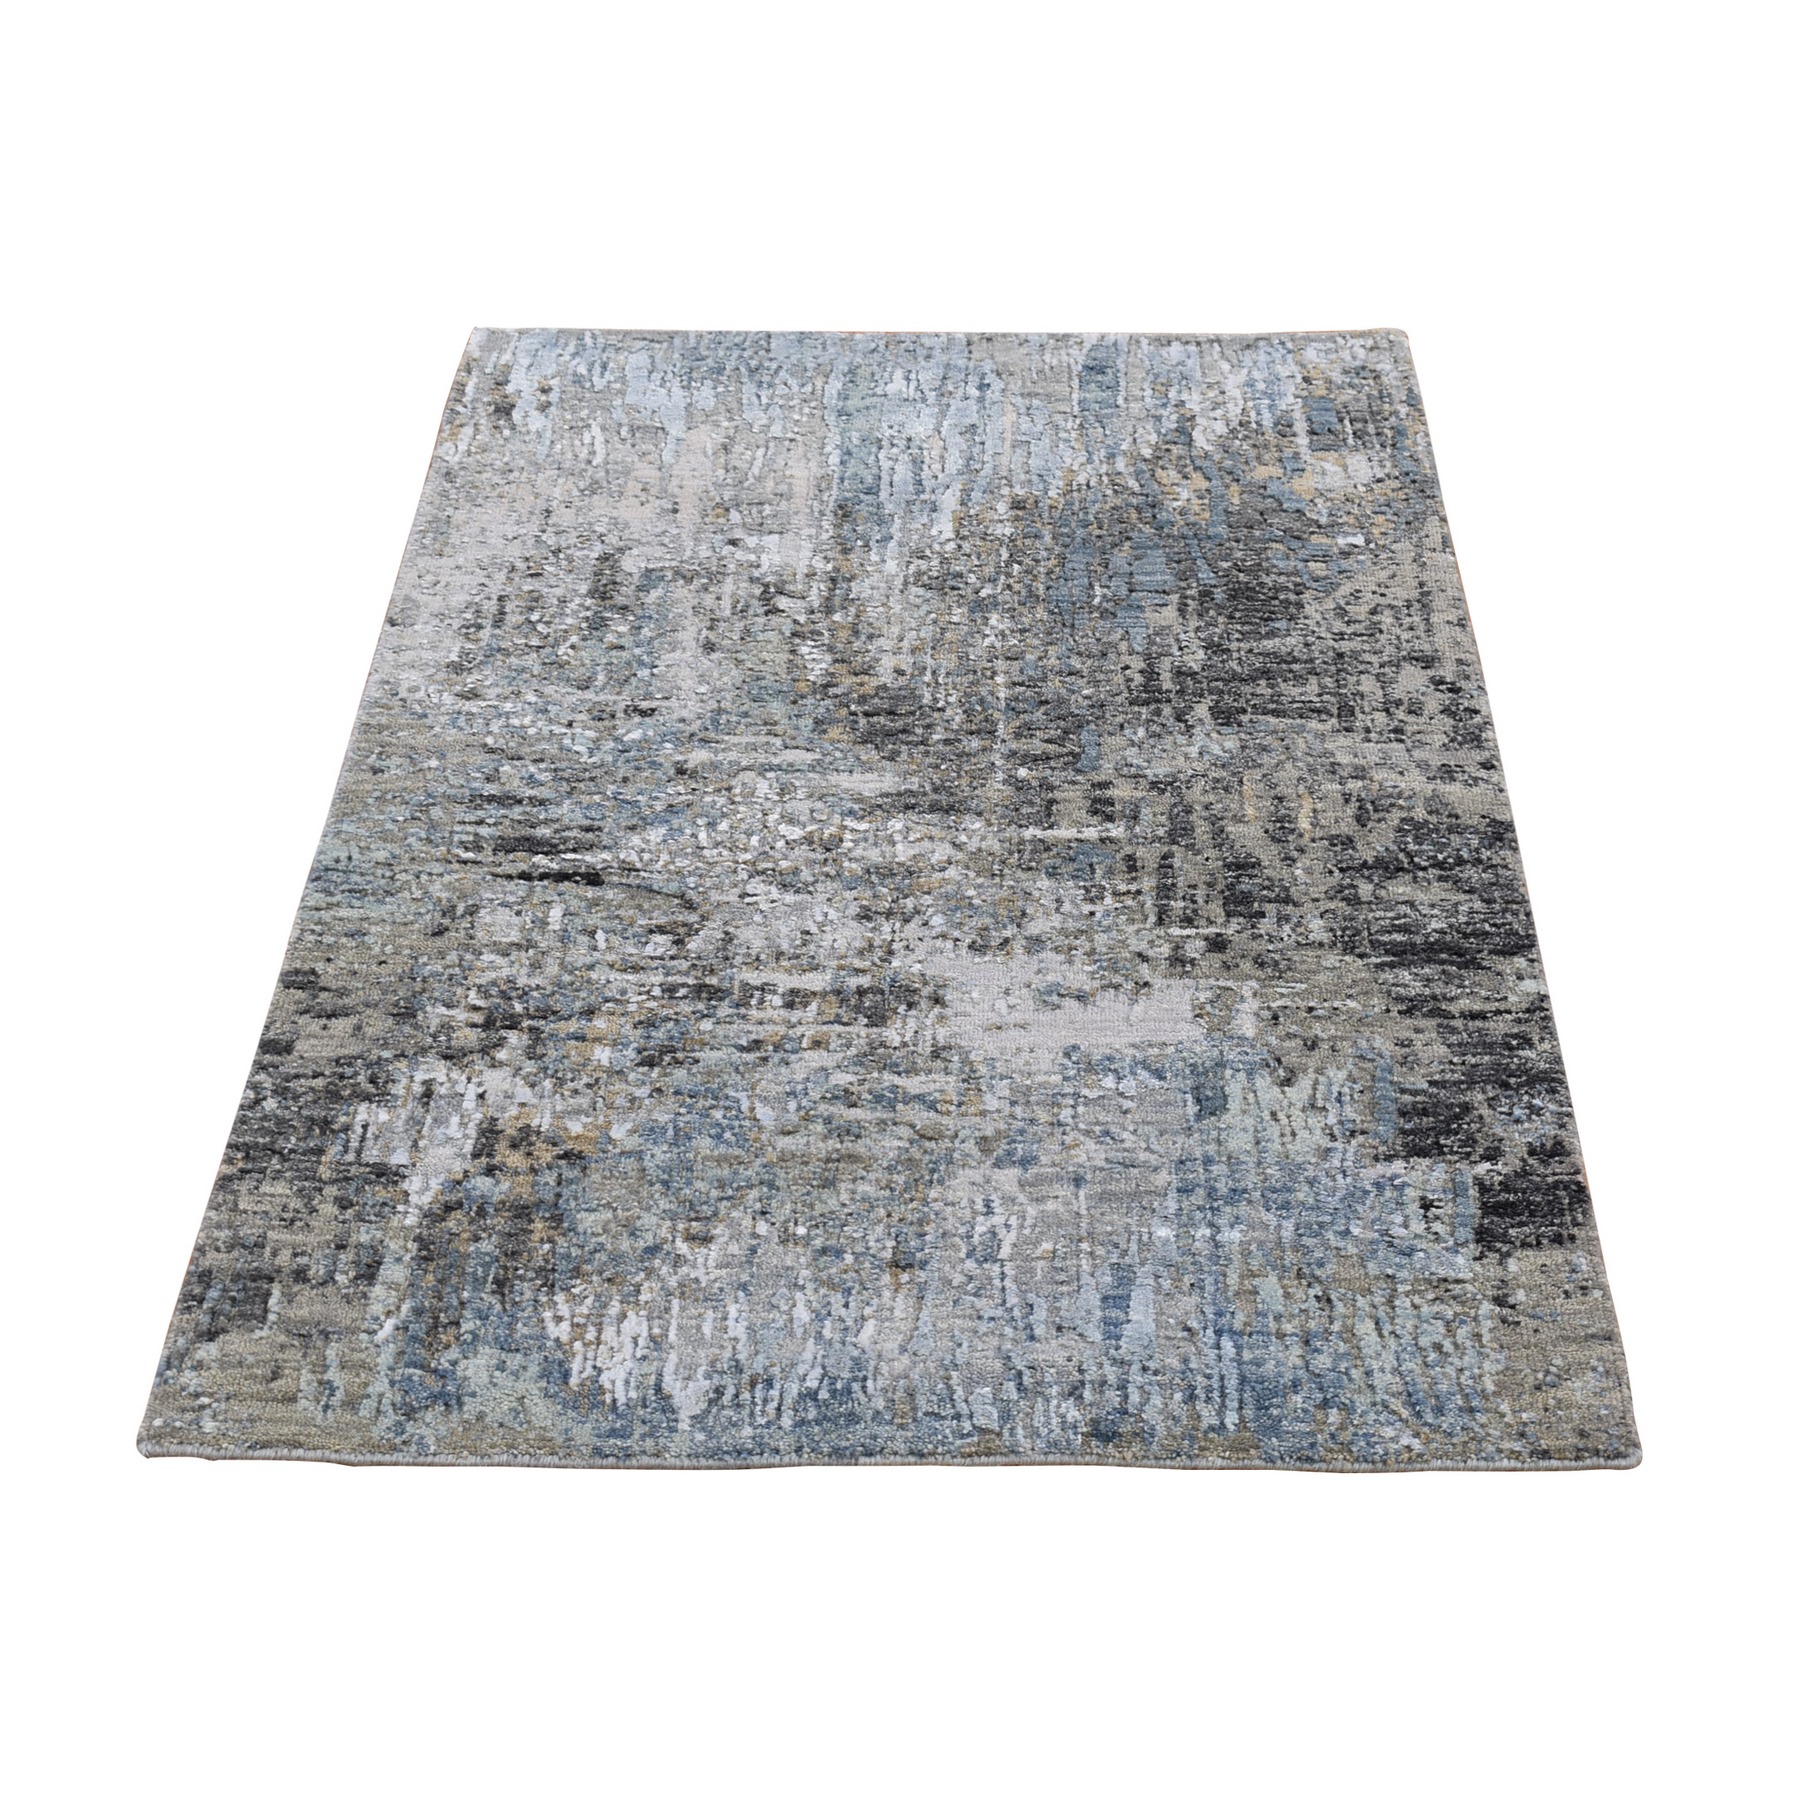 2'6"x4'4" Gray Persian Knot with Abstract Design Wool and Silk Denser Weave Hand Woven Oriental Rug 